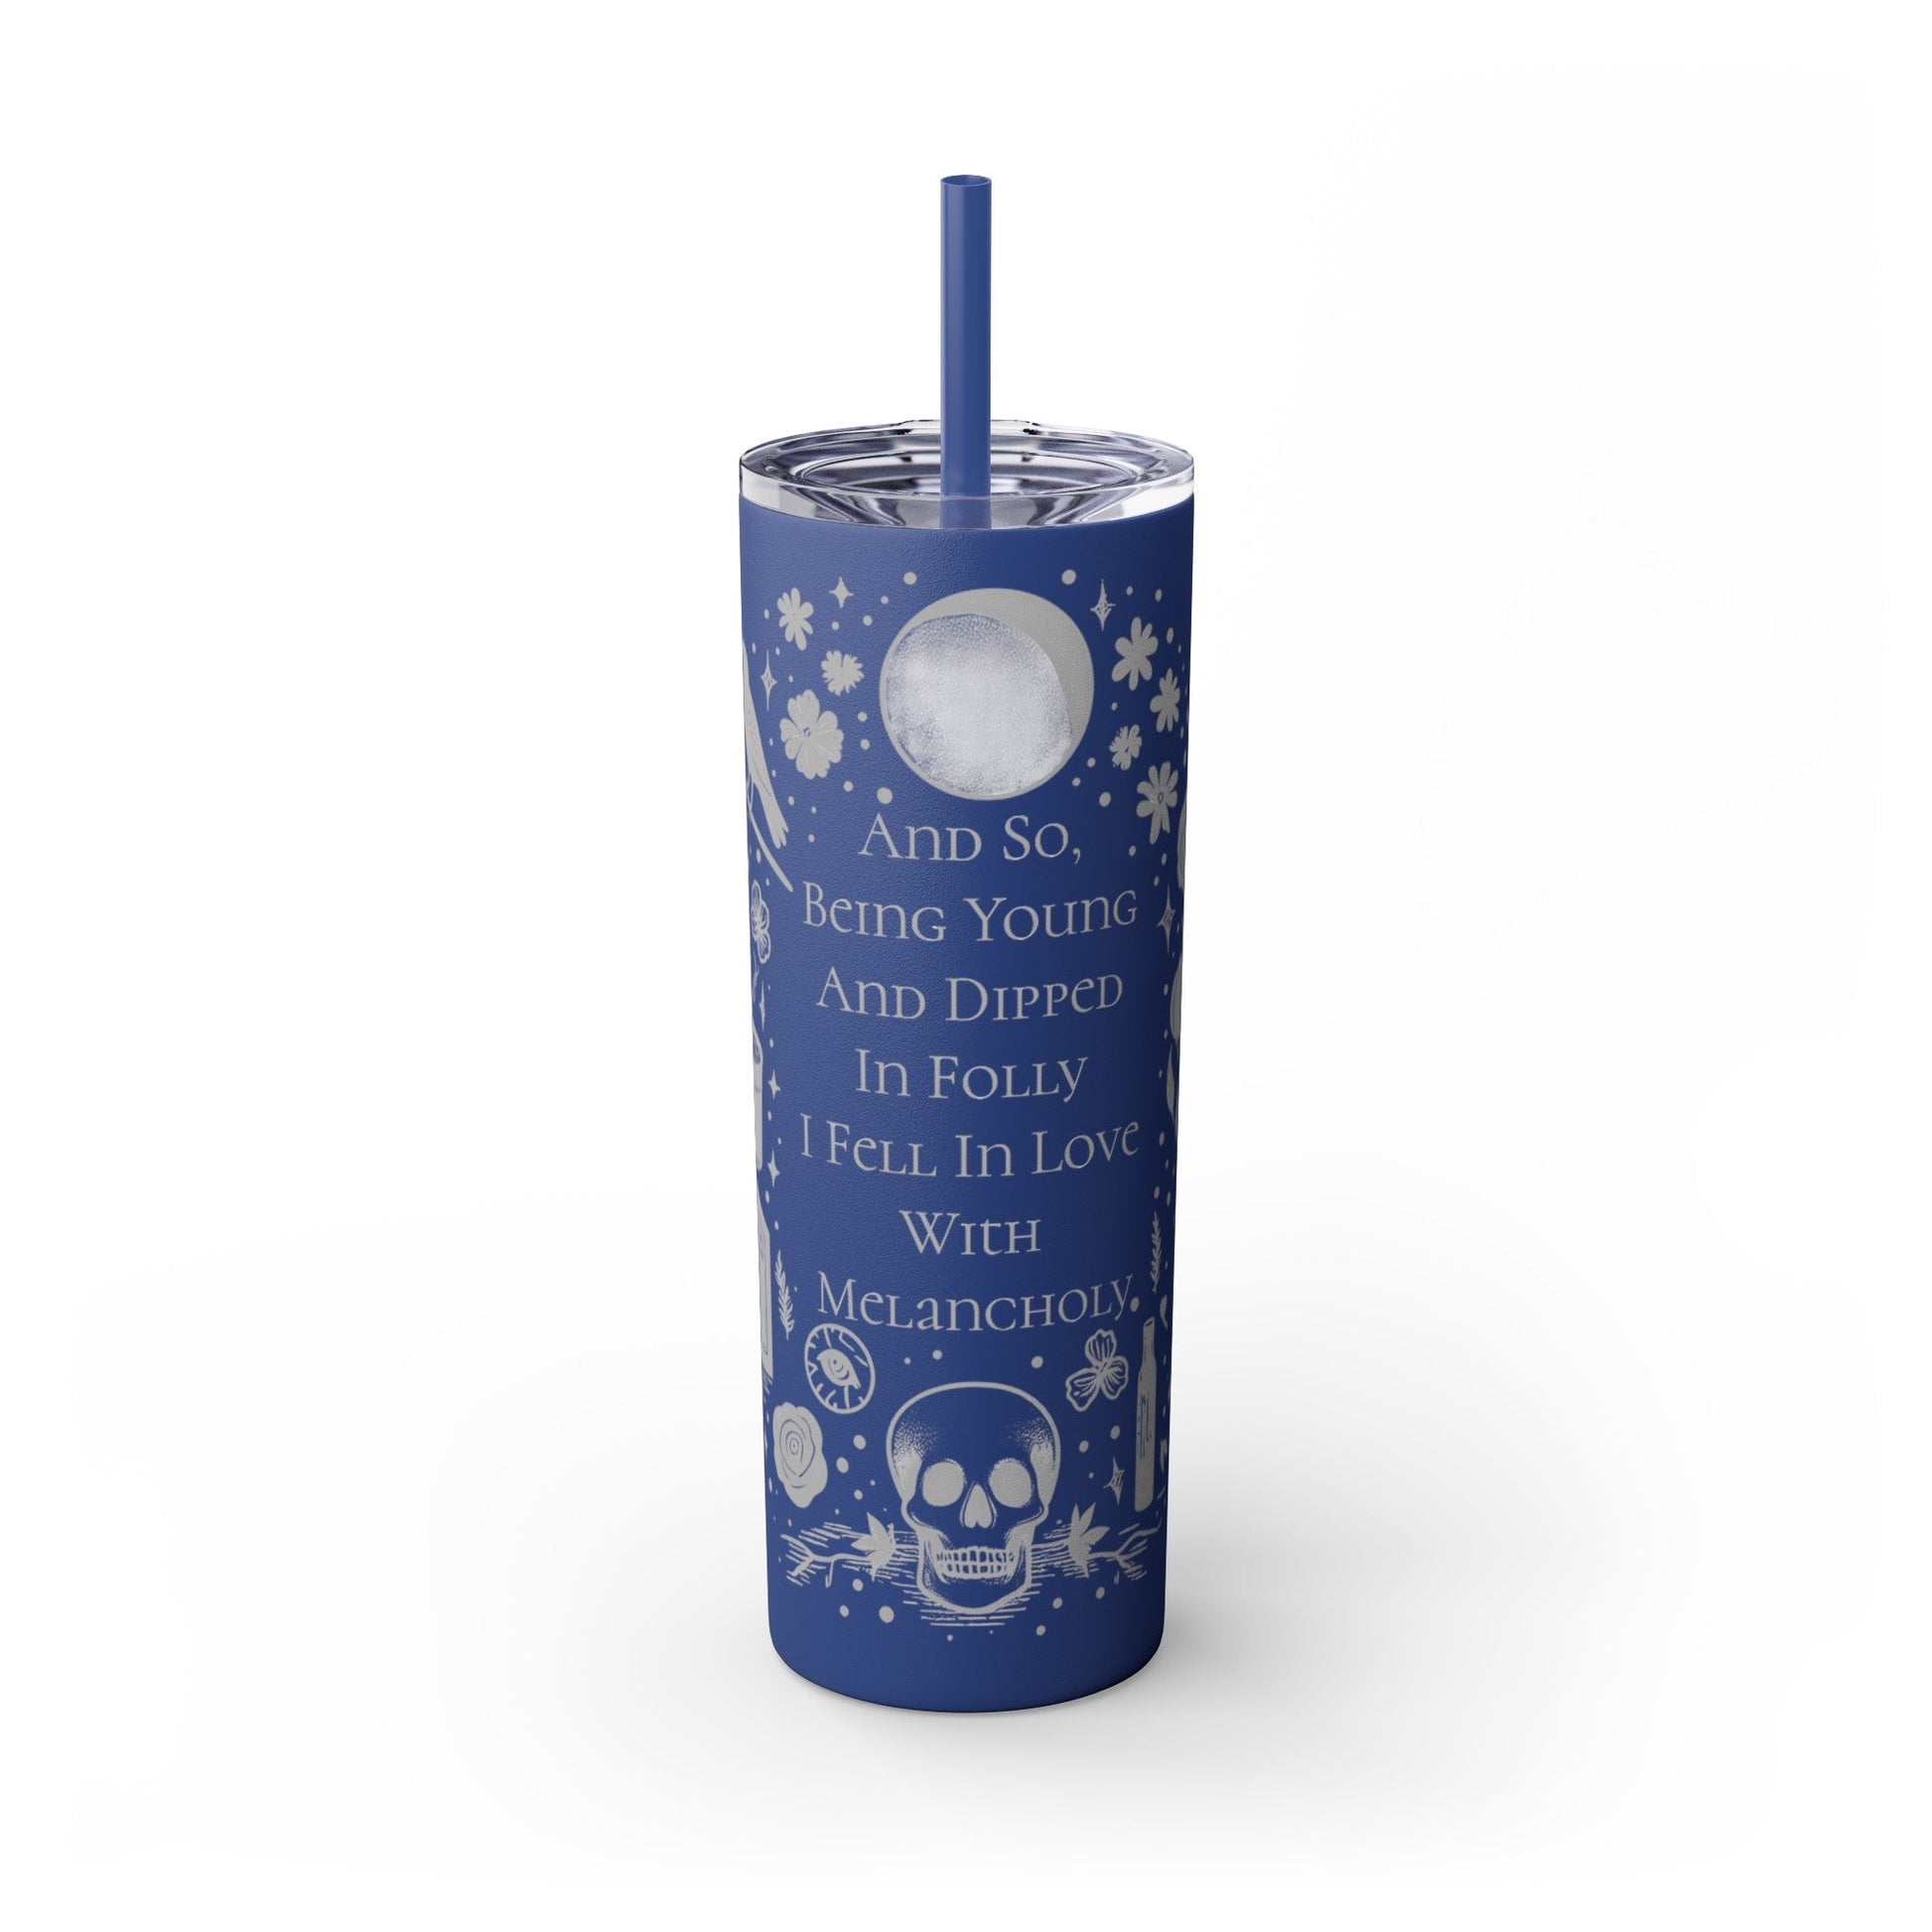 And So Being Young And Dipped In Folly I Fell In Love With Melancholy Skinny Tumbler with StrawMugVTZdesignsMatteNautical Blue20oz20 ozBottles & Tumblerscup